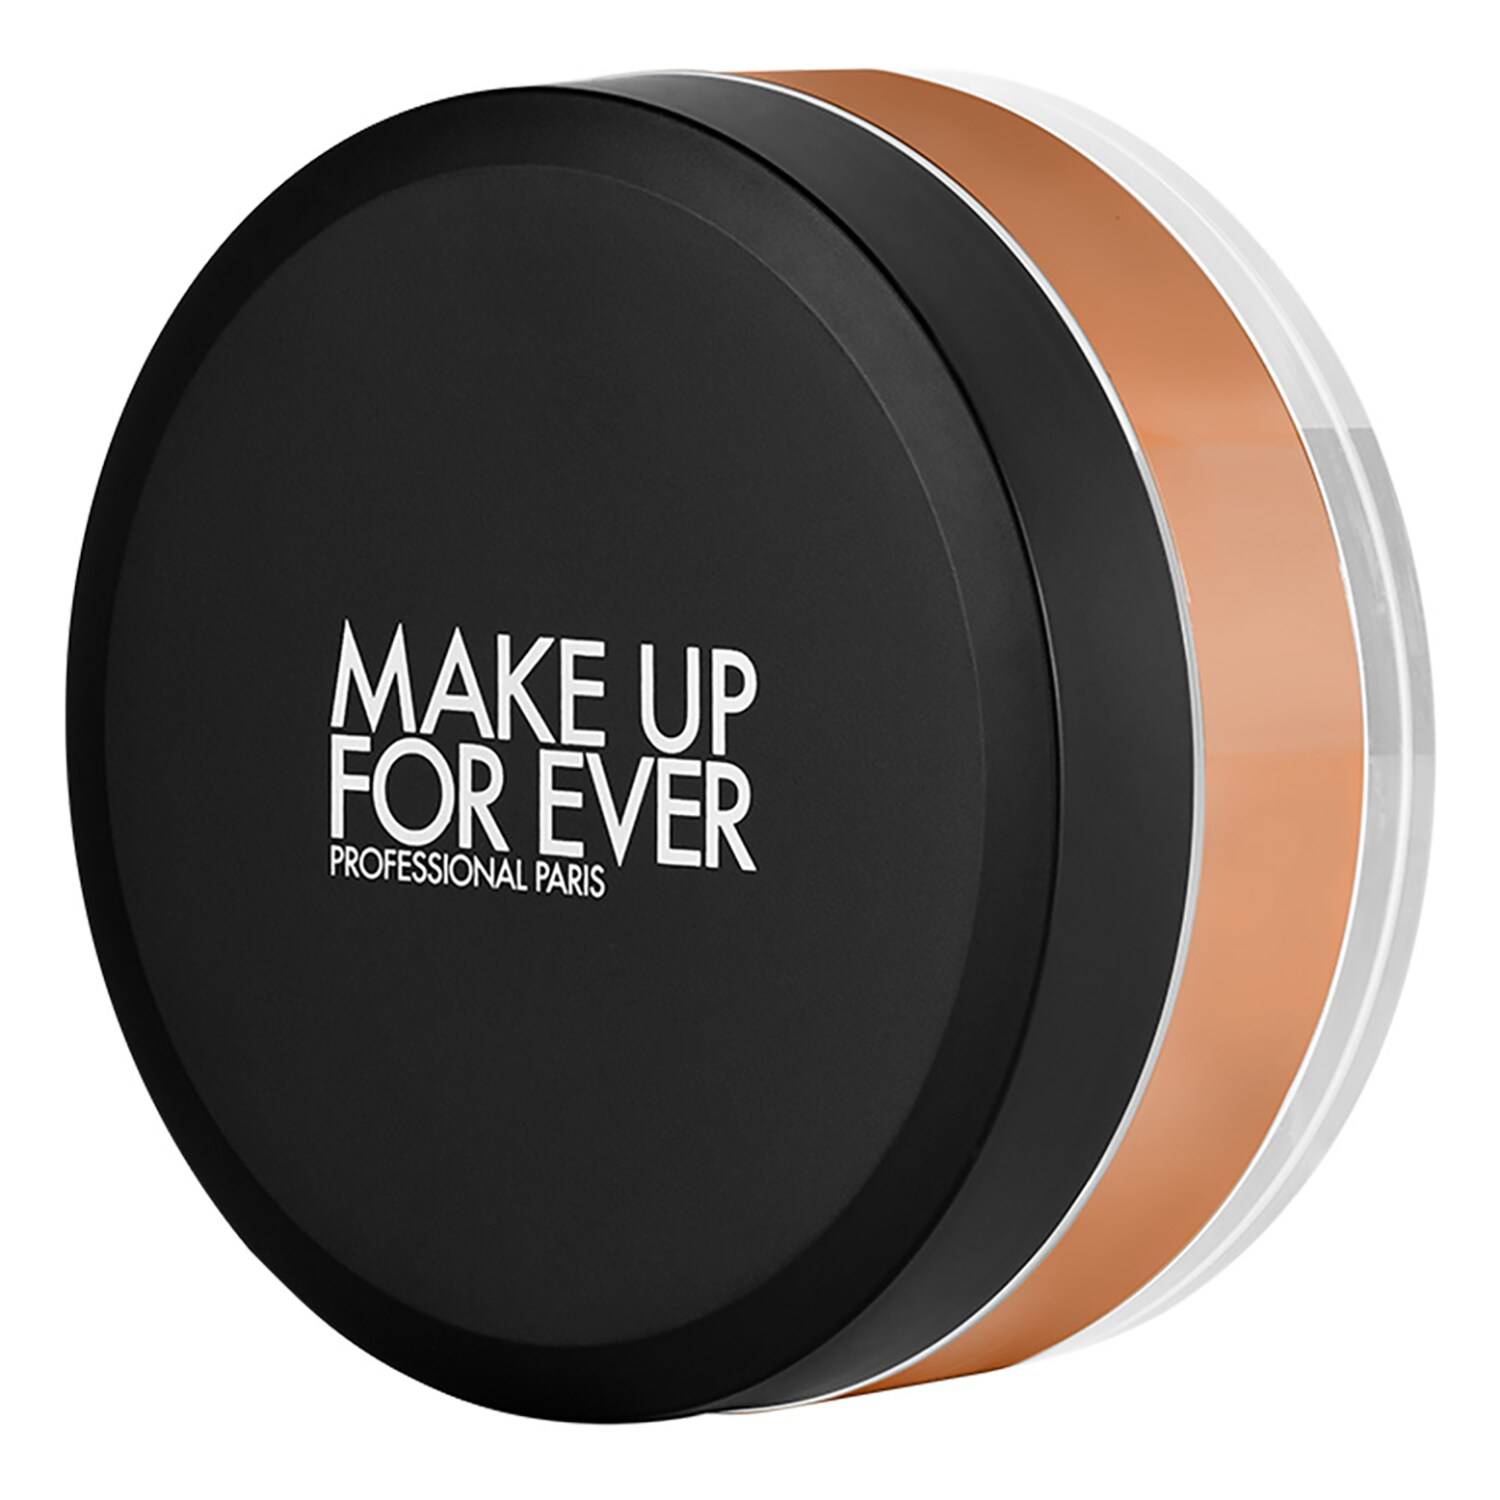 Make Up For Ever Hd Skin Setting Loose Powder 18G 3.2 - Tan Chestnut